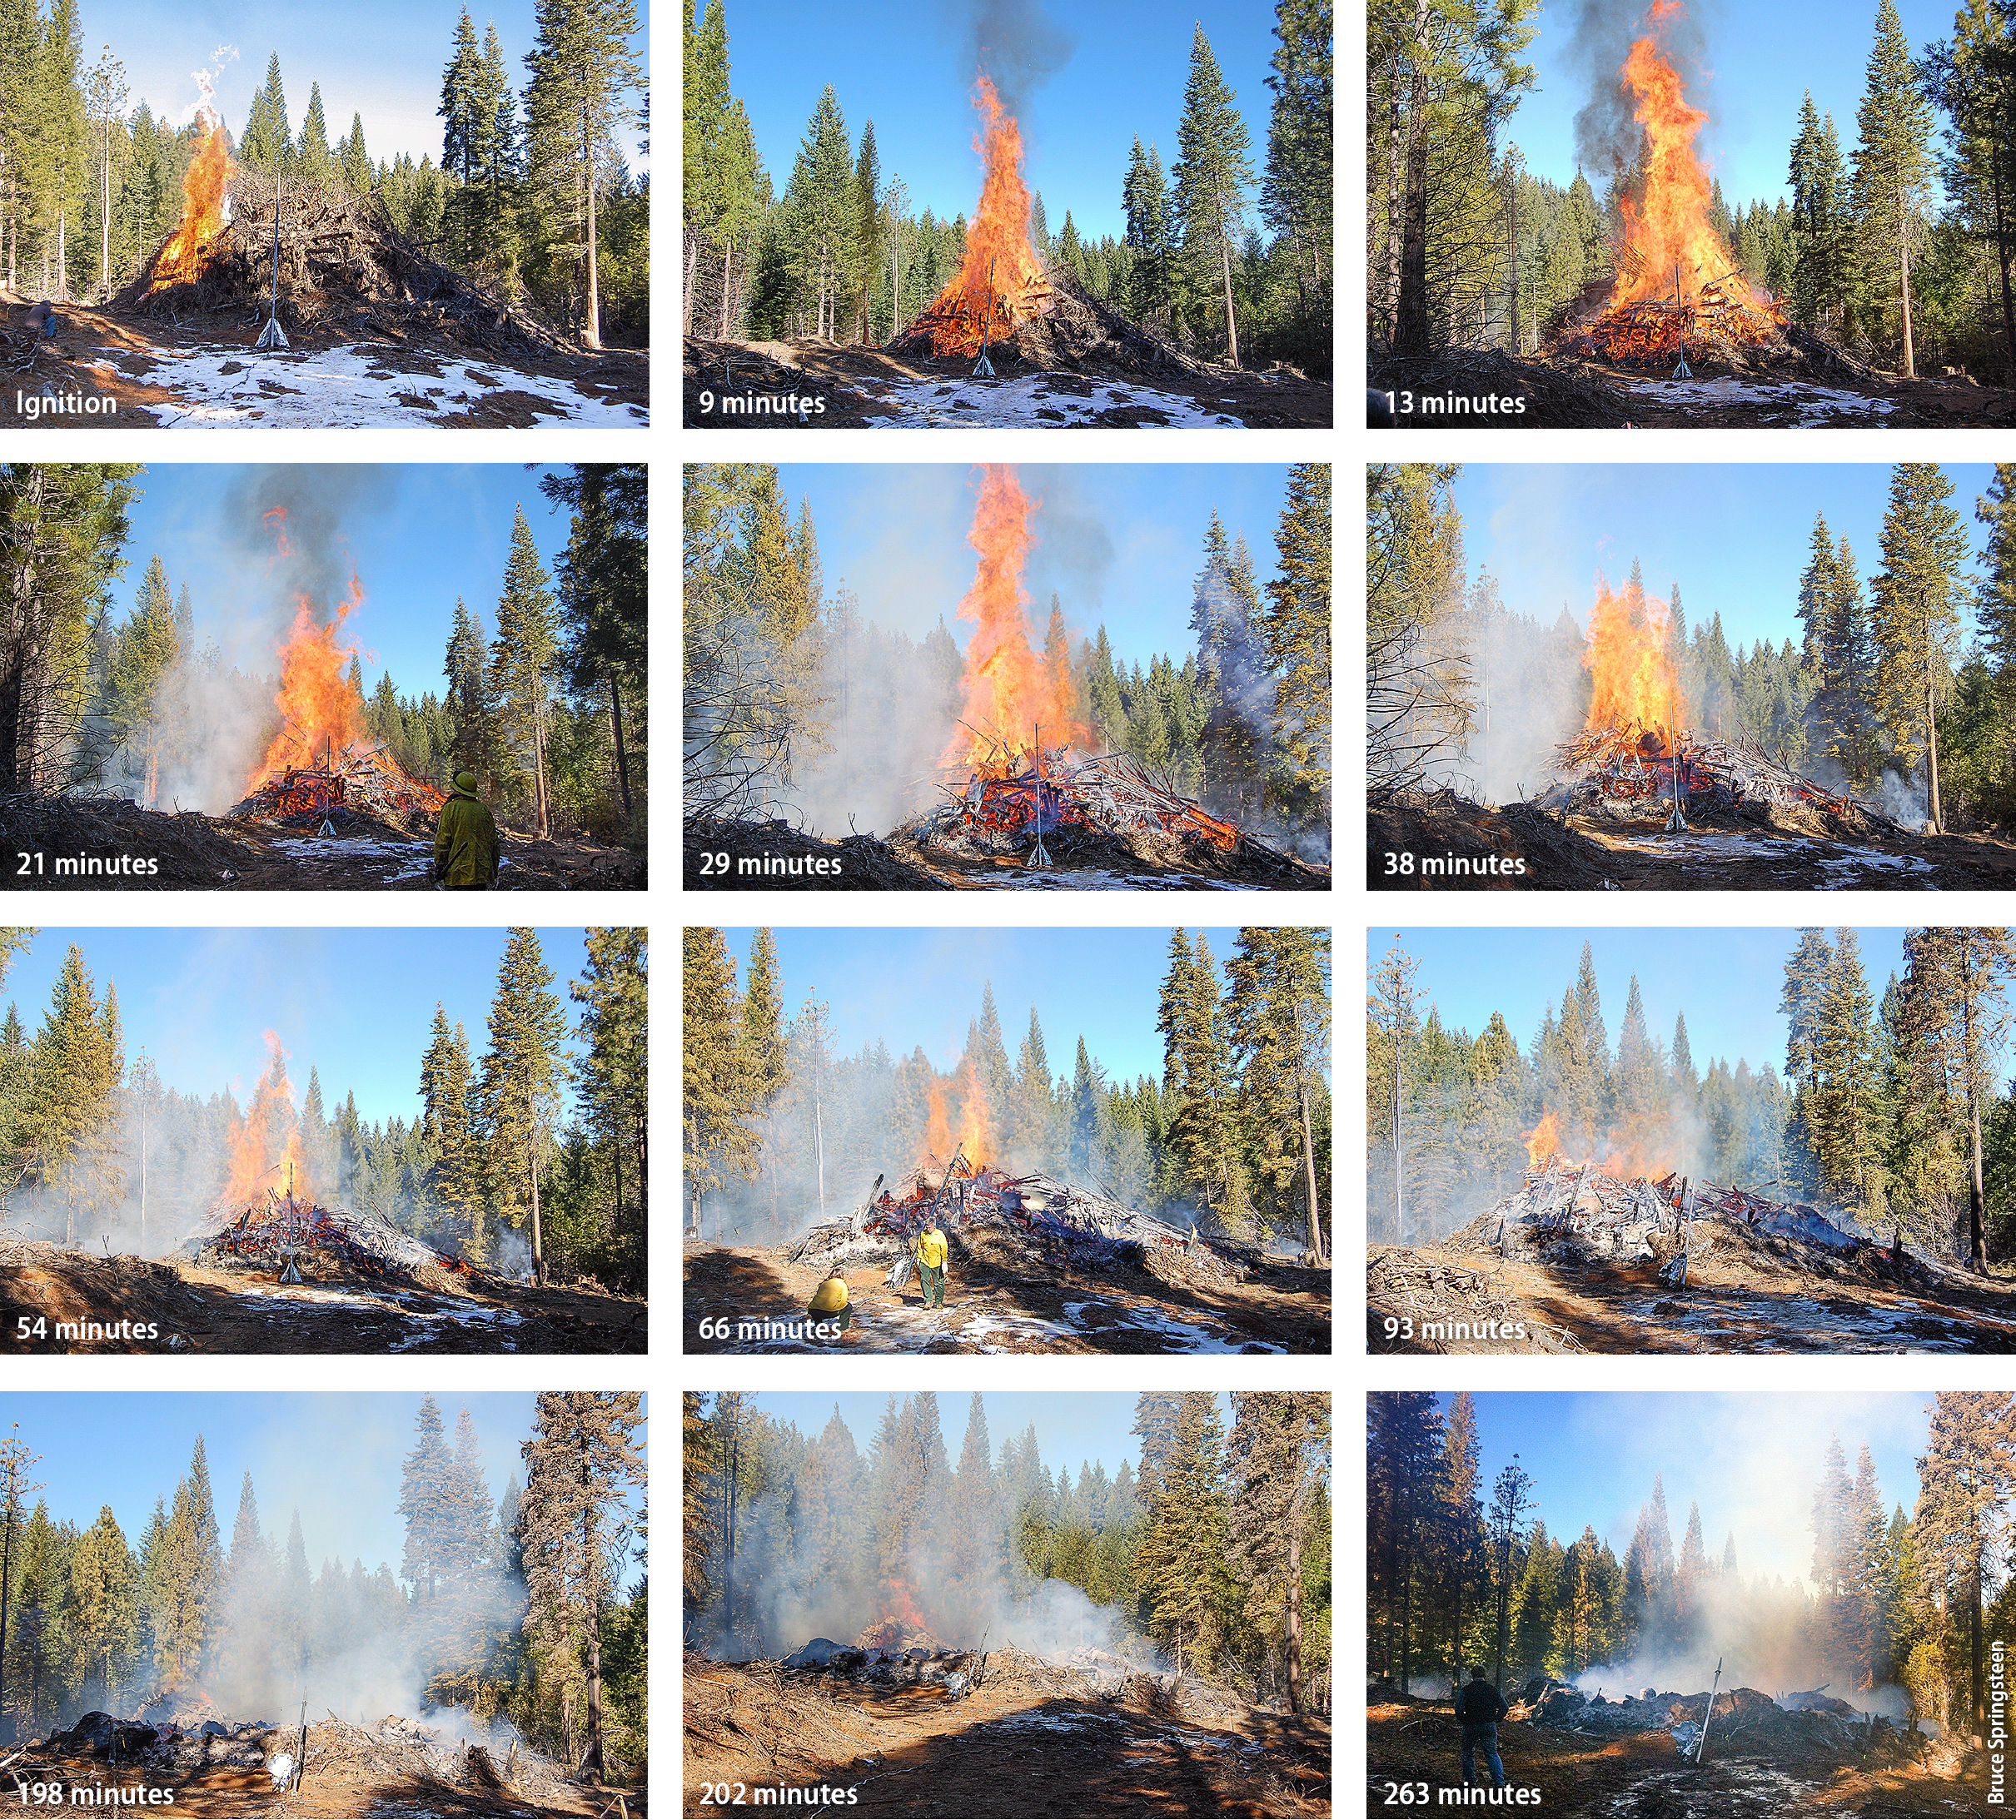 In 2014, researchers measured air emissions from an open pile burn at BFRS. Due to the size and height of the burn, they were unable to sample the main section of the plume during the full flaming combustion mode (see time interval at 13 minutes). Flaming phase transitioned to smoldering phase approximately 40 minutes after ignition.